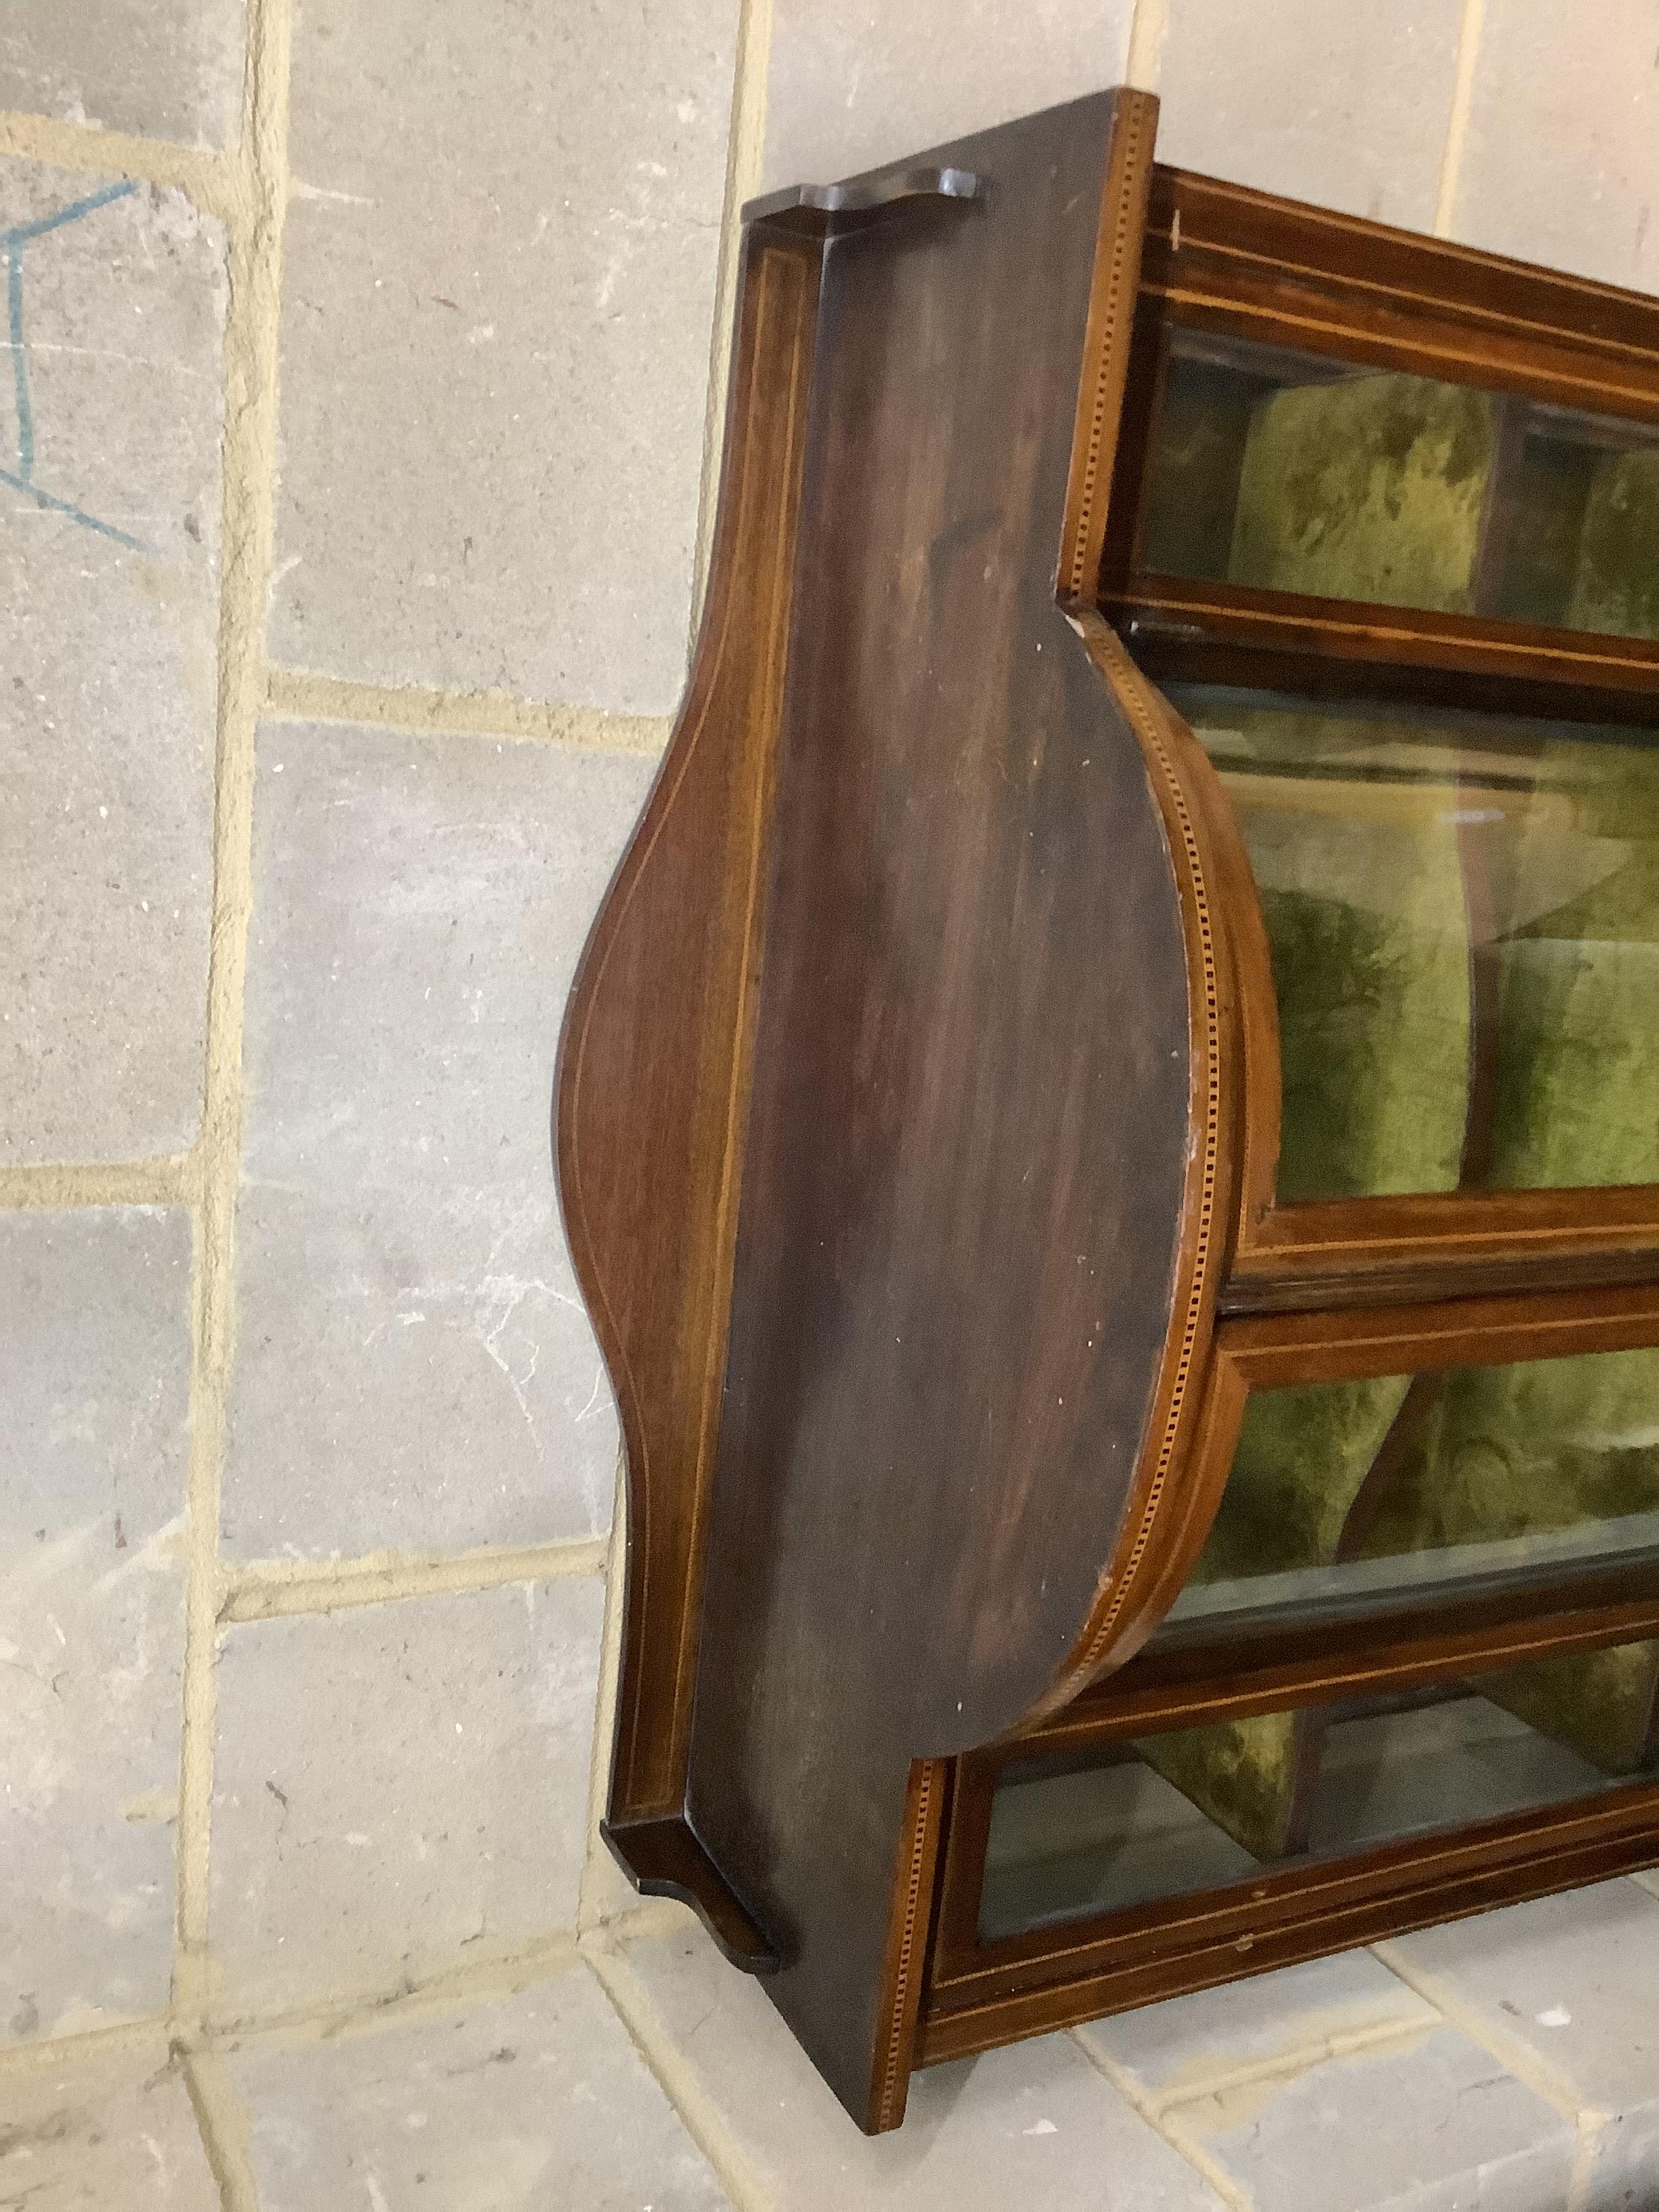 An Edwardian inlaid mahogany bow-fronted display cabinet, width 91cm, depth 40cm, height 166cm